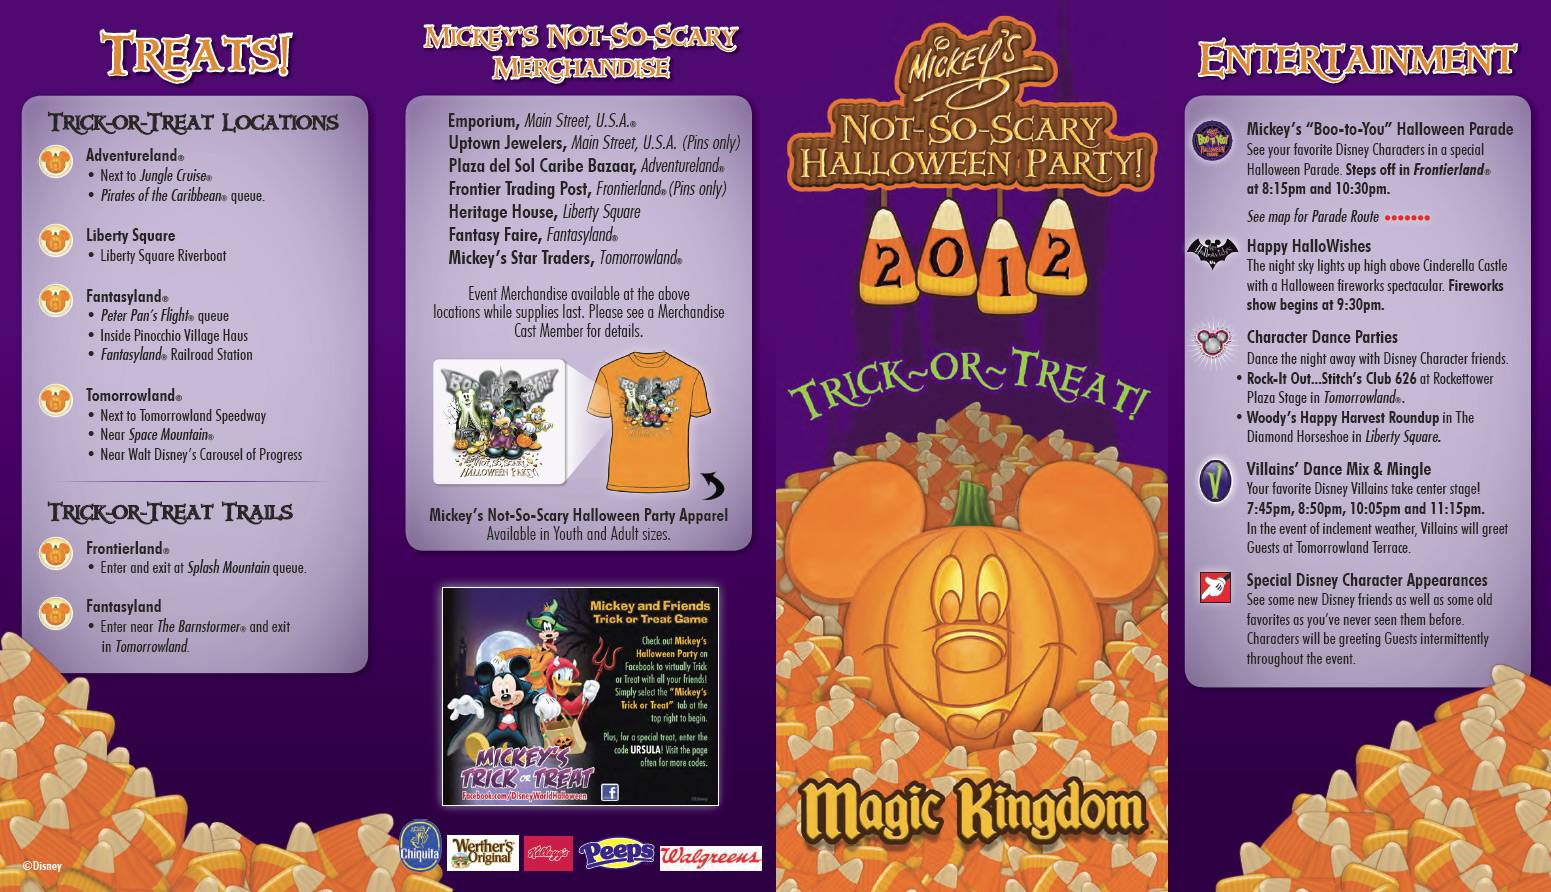 Mickey's Not-So-Scary Halloween Party guide